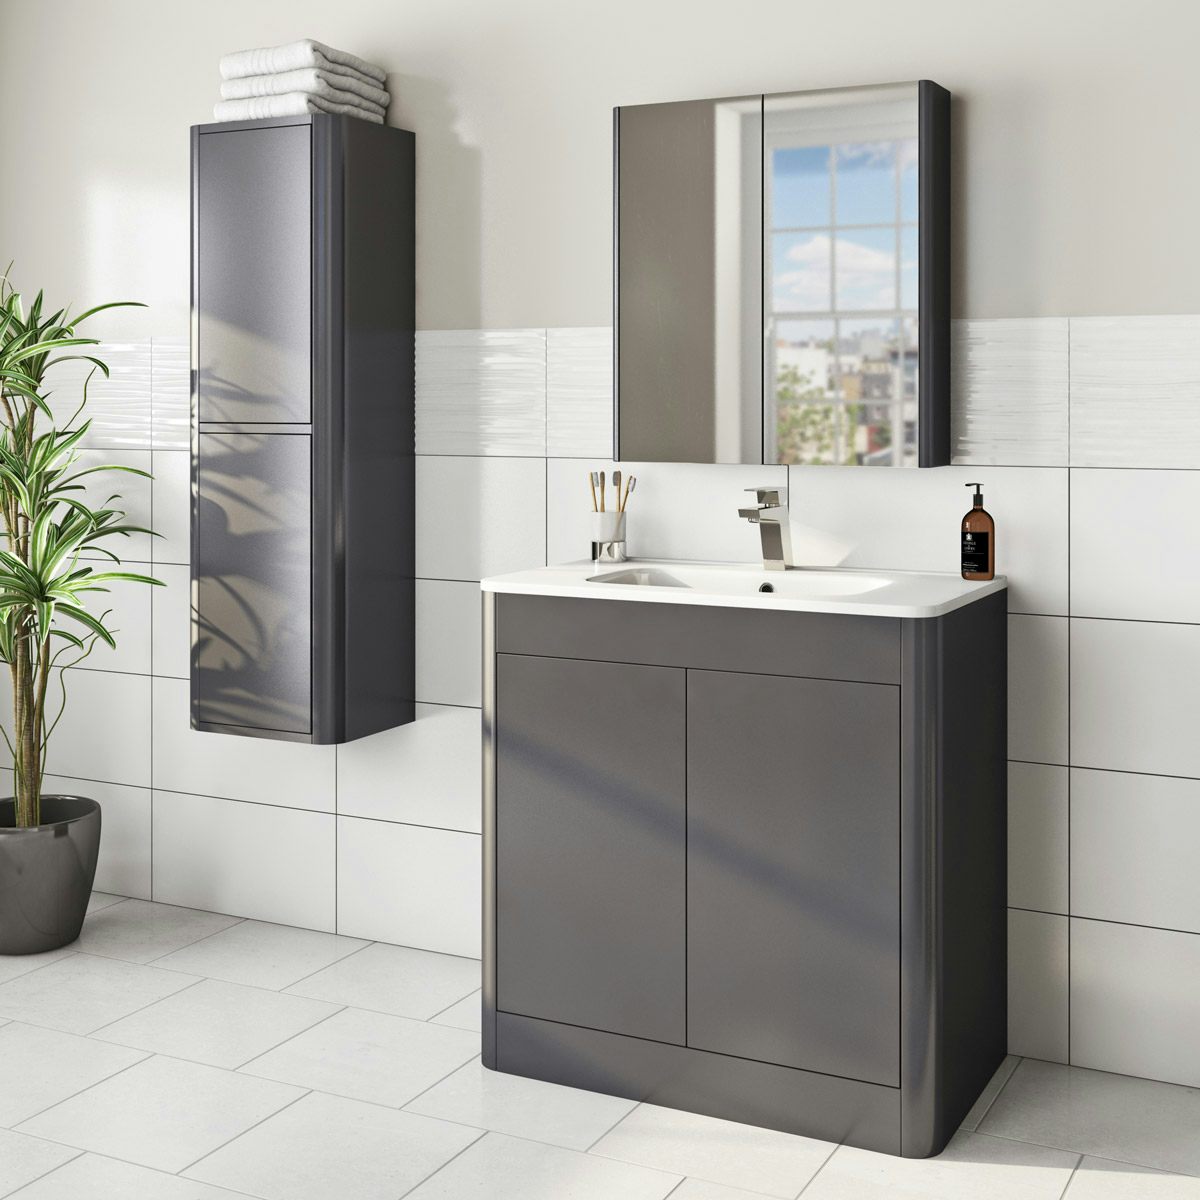 Mode Carter slate gloss grey furniture package with floorstanding vanity unit 800mm